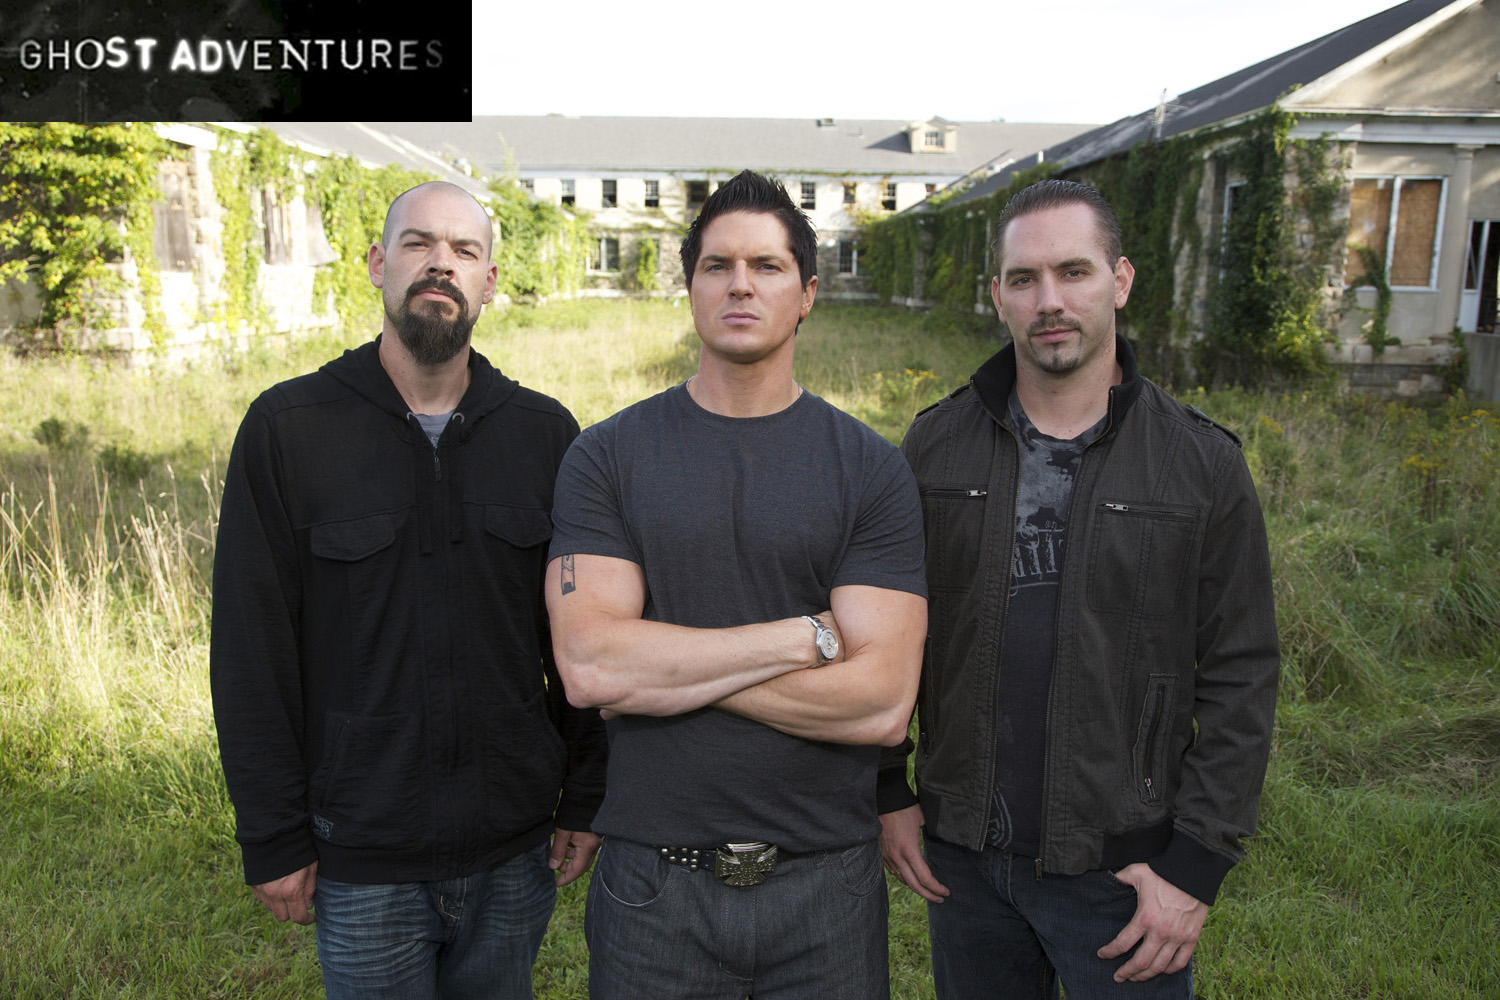 Ghost Adventures Host Zak Bagans Buys Haunted House in Indiana Known to Locals as a Portal to Hell